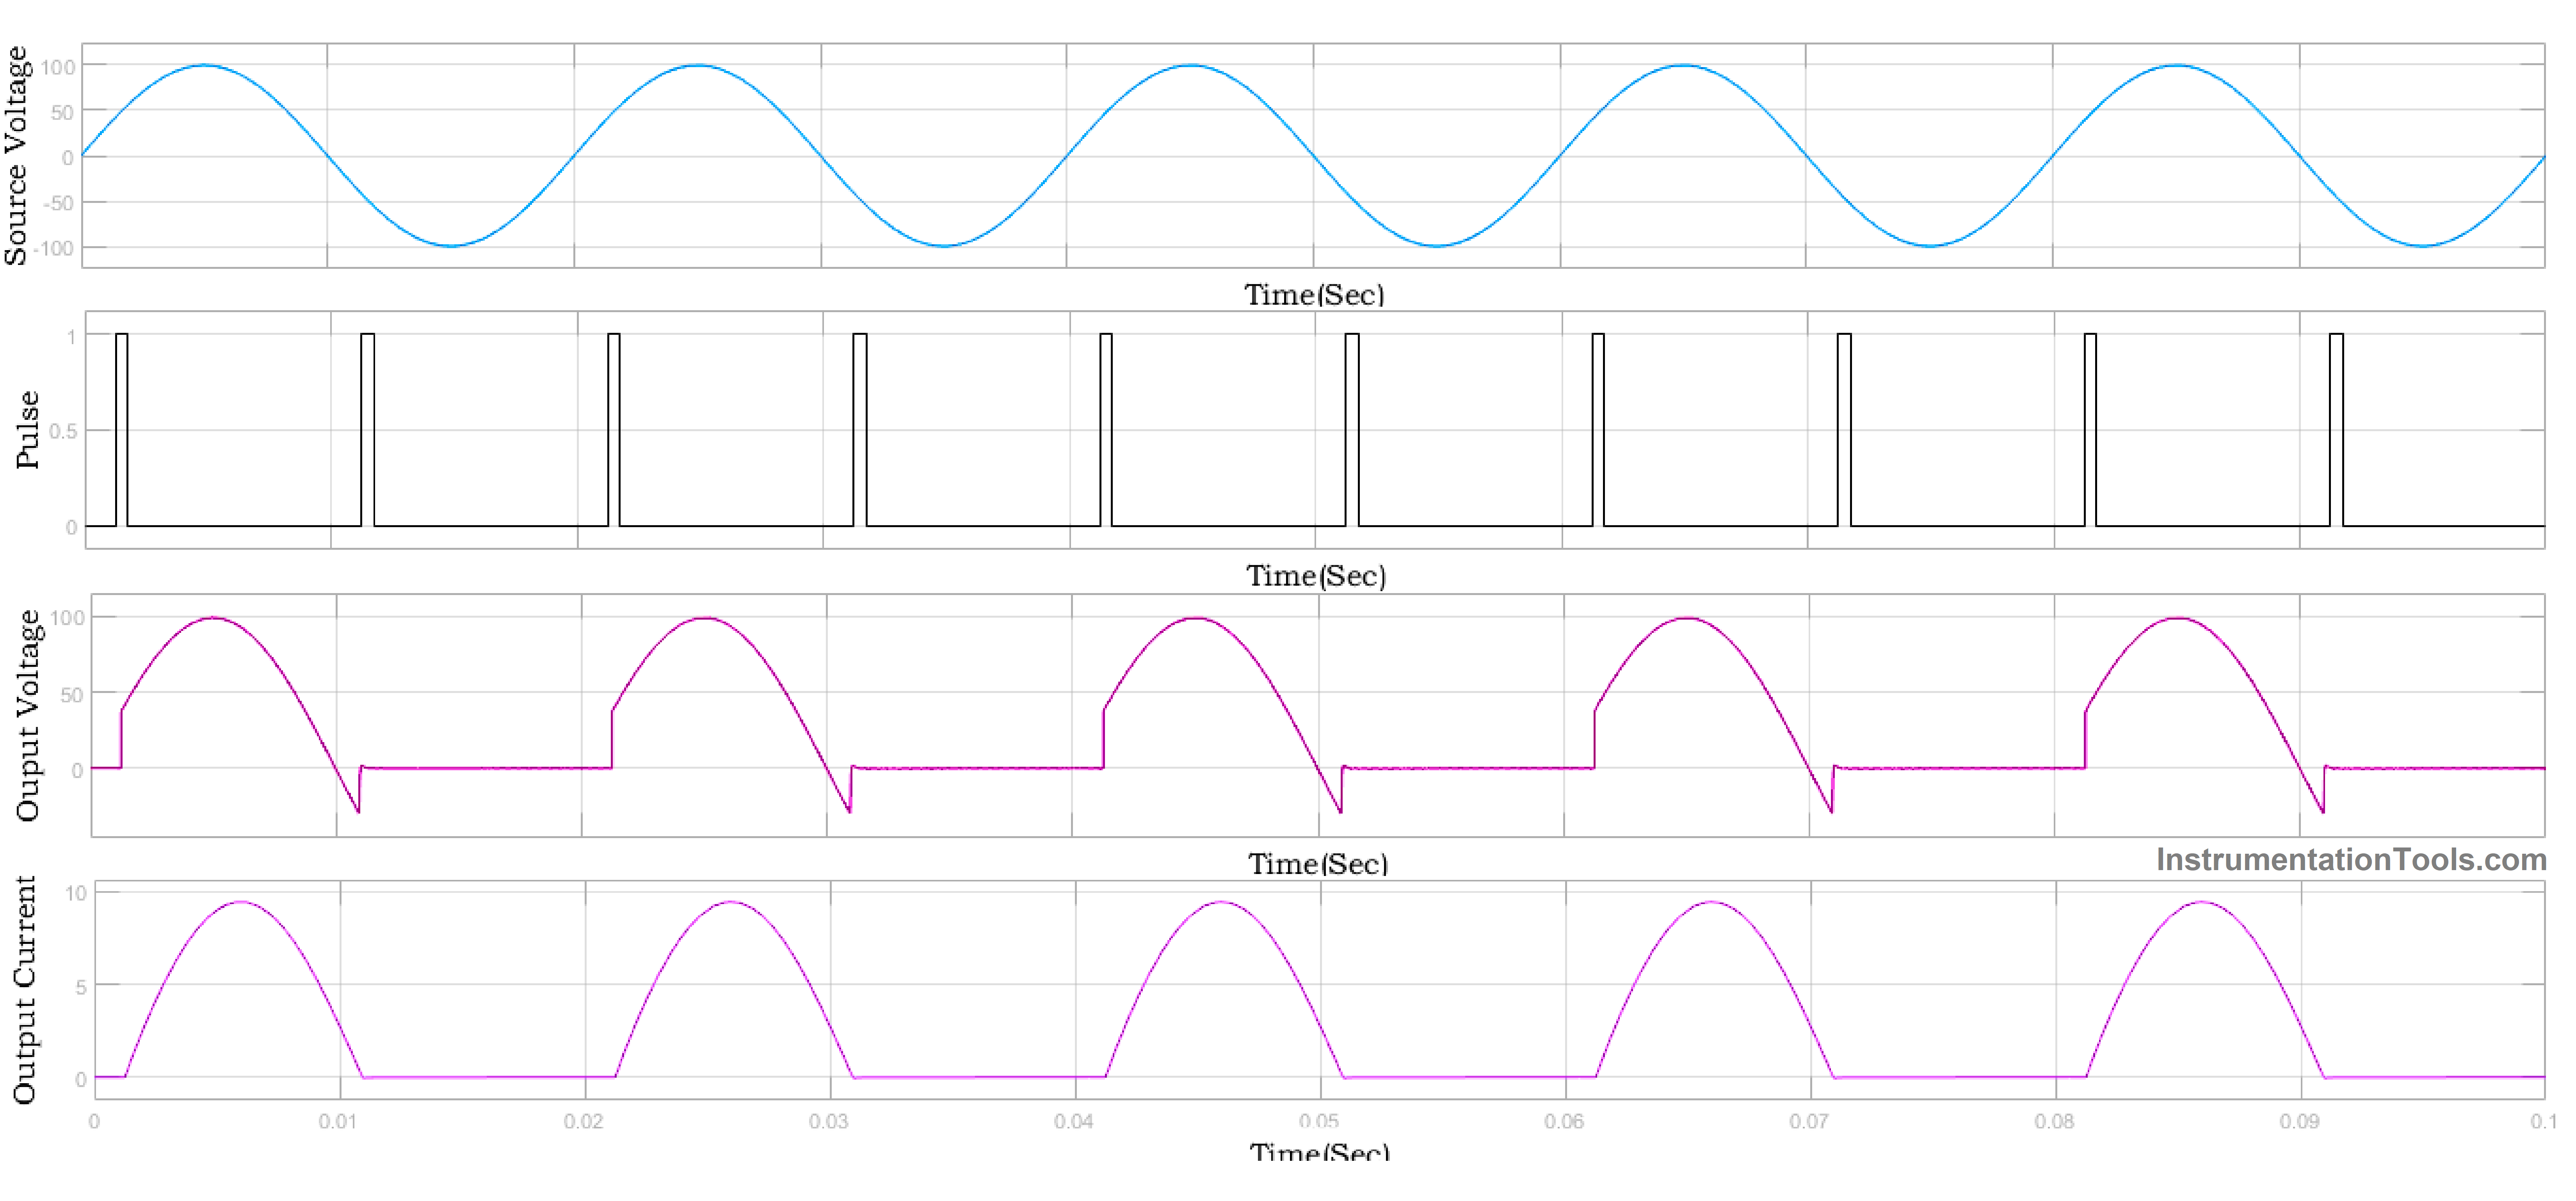 Simulink Response of Half-controlled Rectifier With RL Load